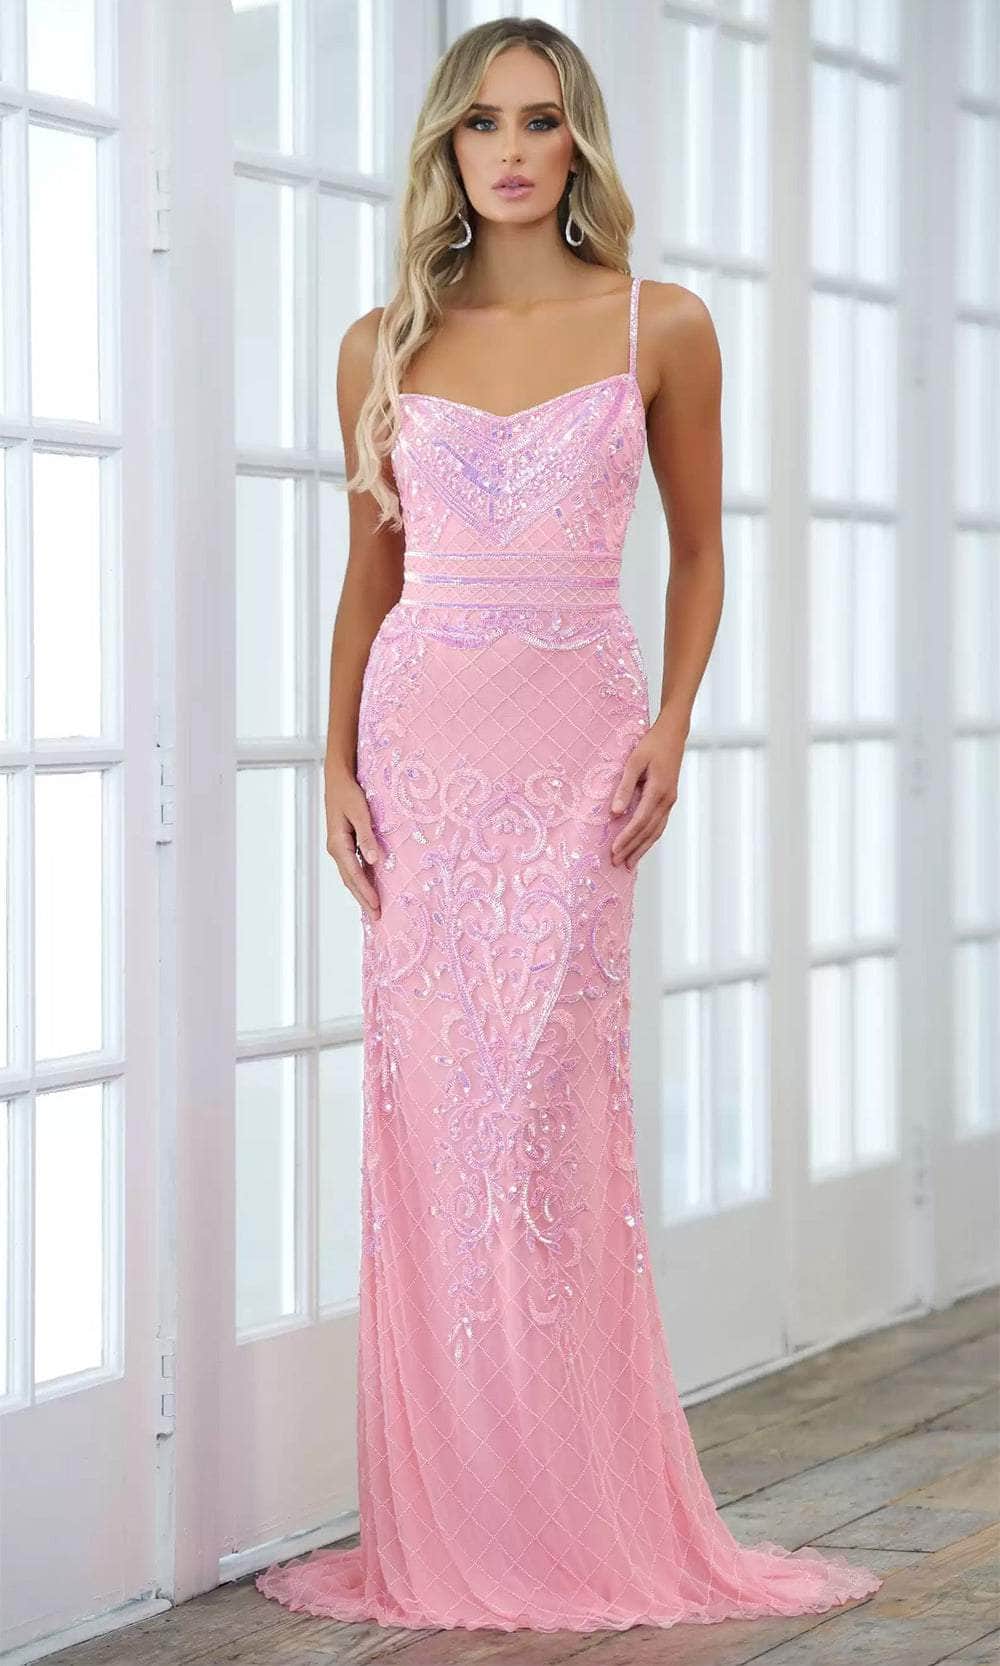 Image of Aleta Couture 716L - Sequin Embellished Semi Sweetheart Neck Prom Gown